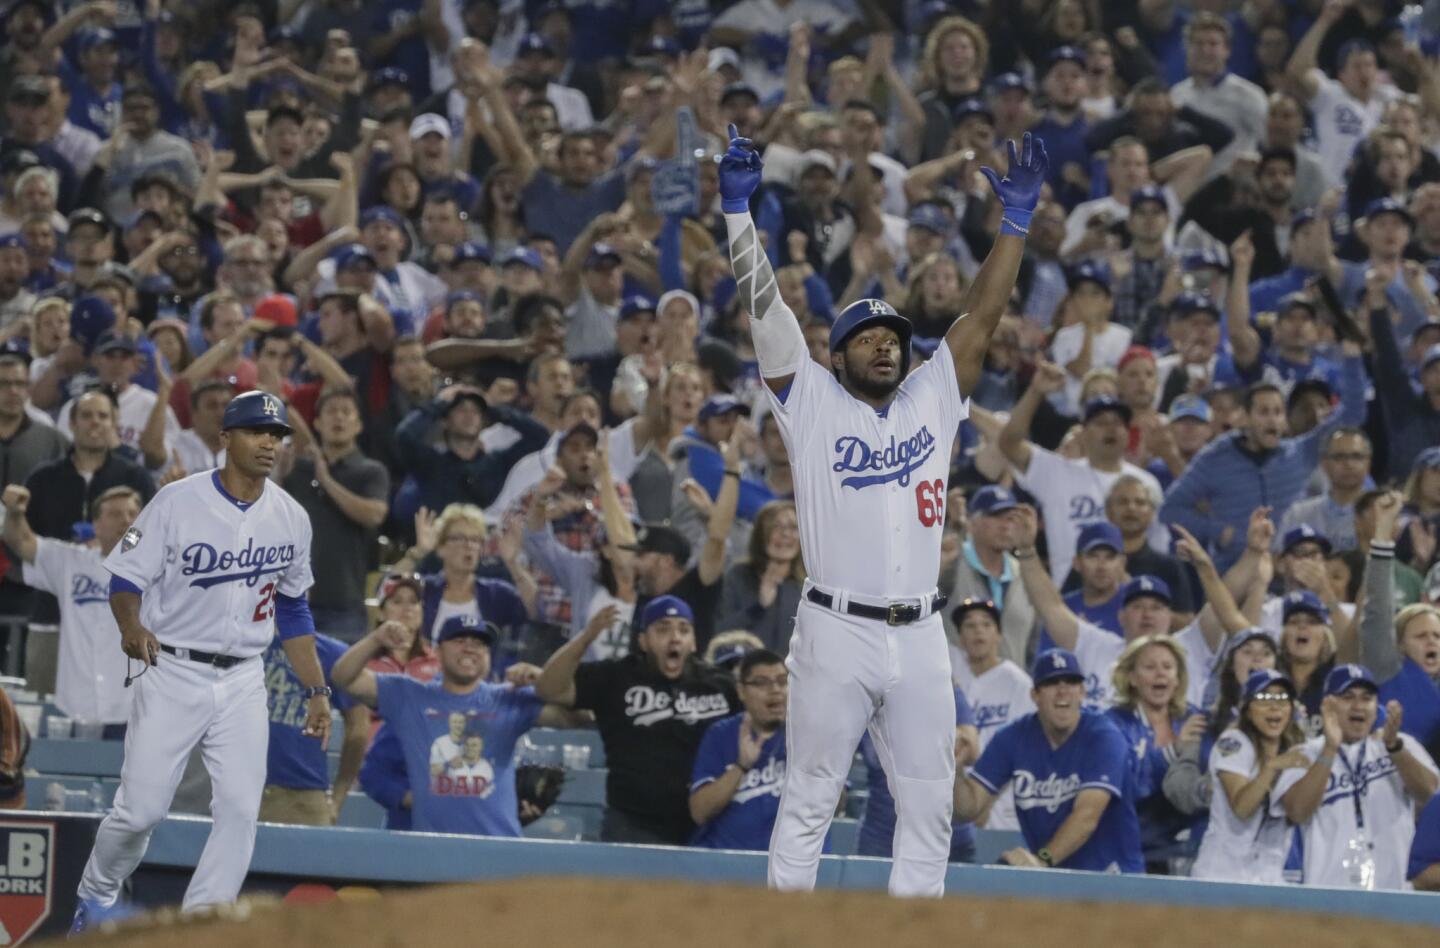 Dodgers Yasiel Puig reacts after reaching base on an error in the 13th inning, tying the score at 2.